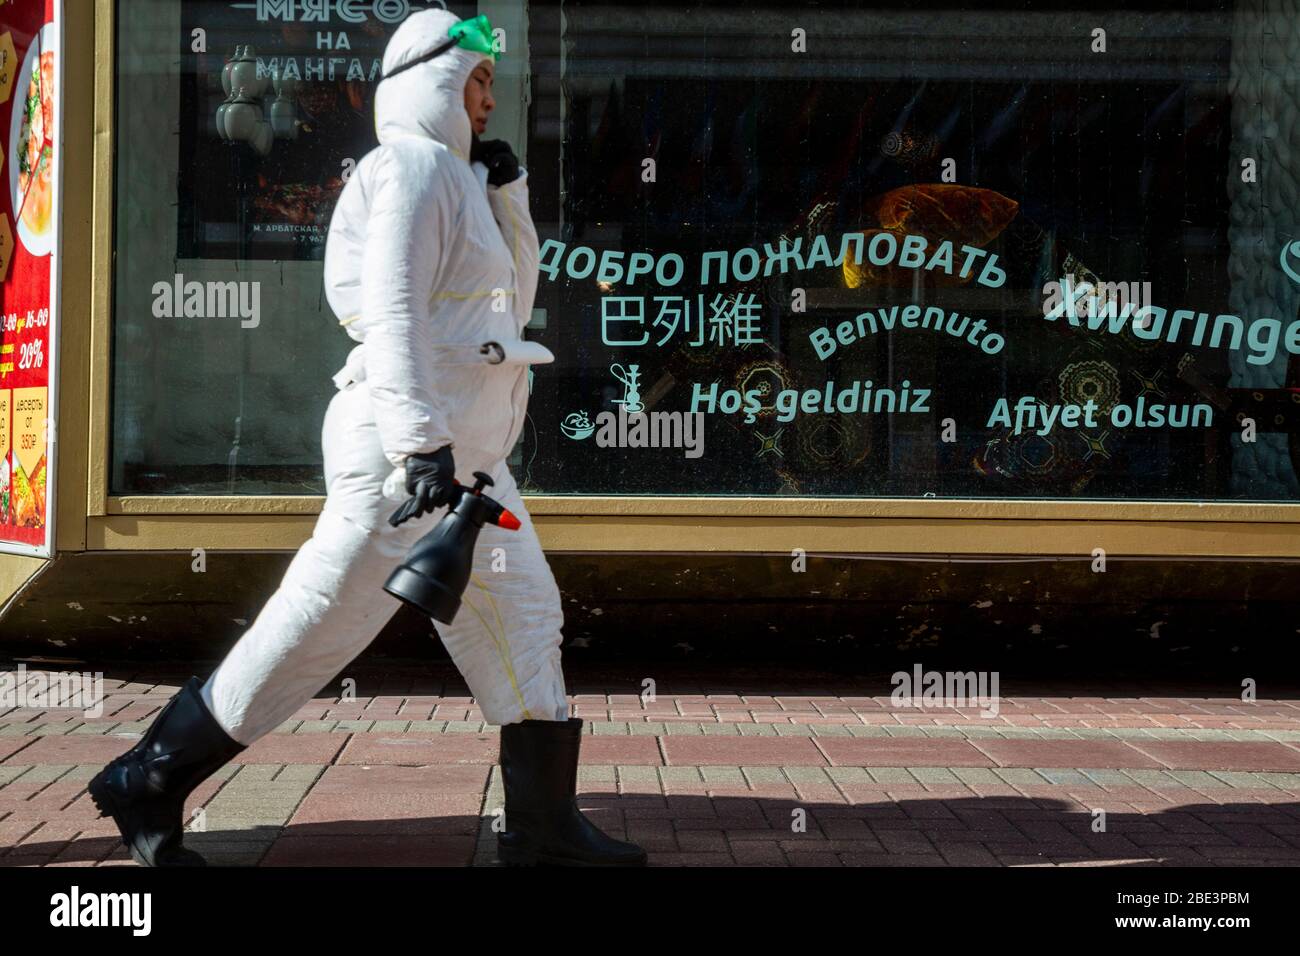 Moscow, Russia.11th April, 2020. A worker in special clothing make disinfection on Arbat street in Moscow during the novel coronavirus COVID-19 pandemic in Russia. A worker walks against the background of a showcase with inscriptions in different languages reading 'Welcome' Stock Photo